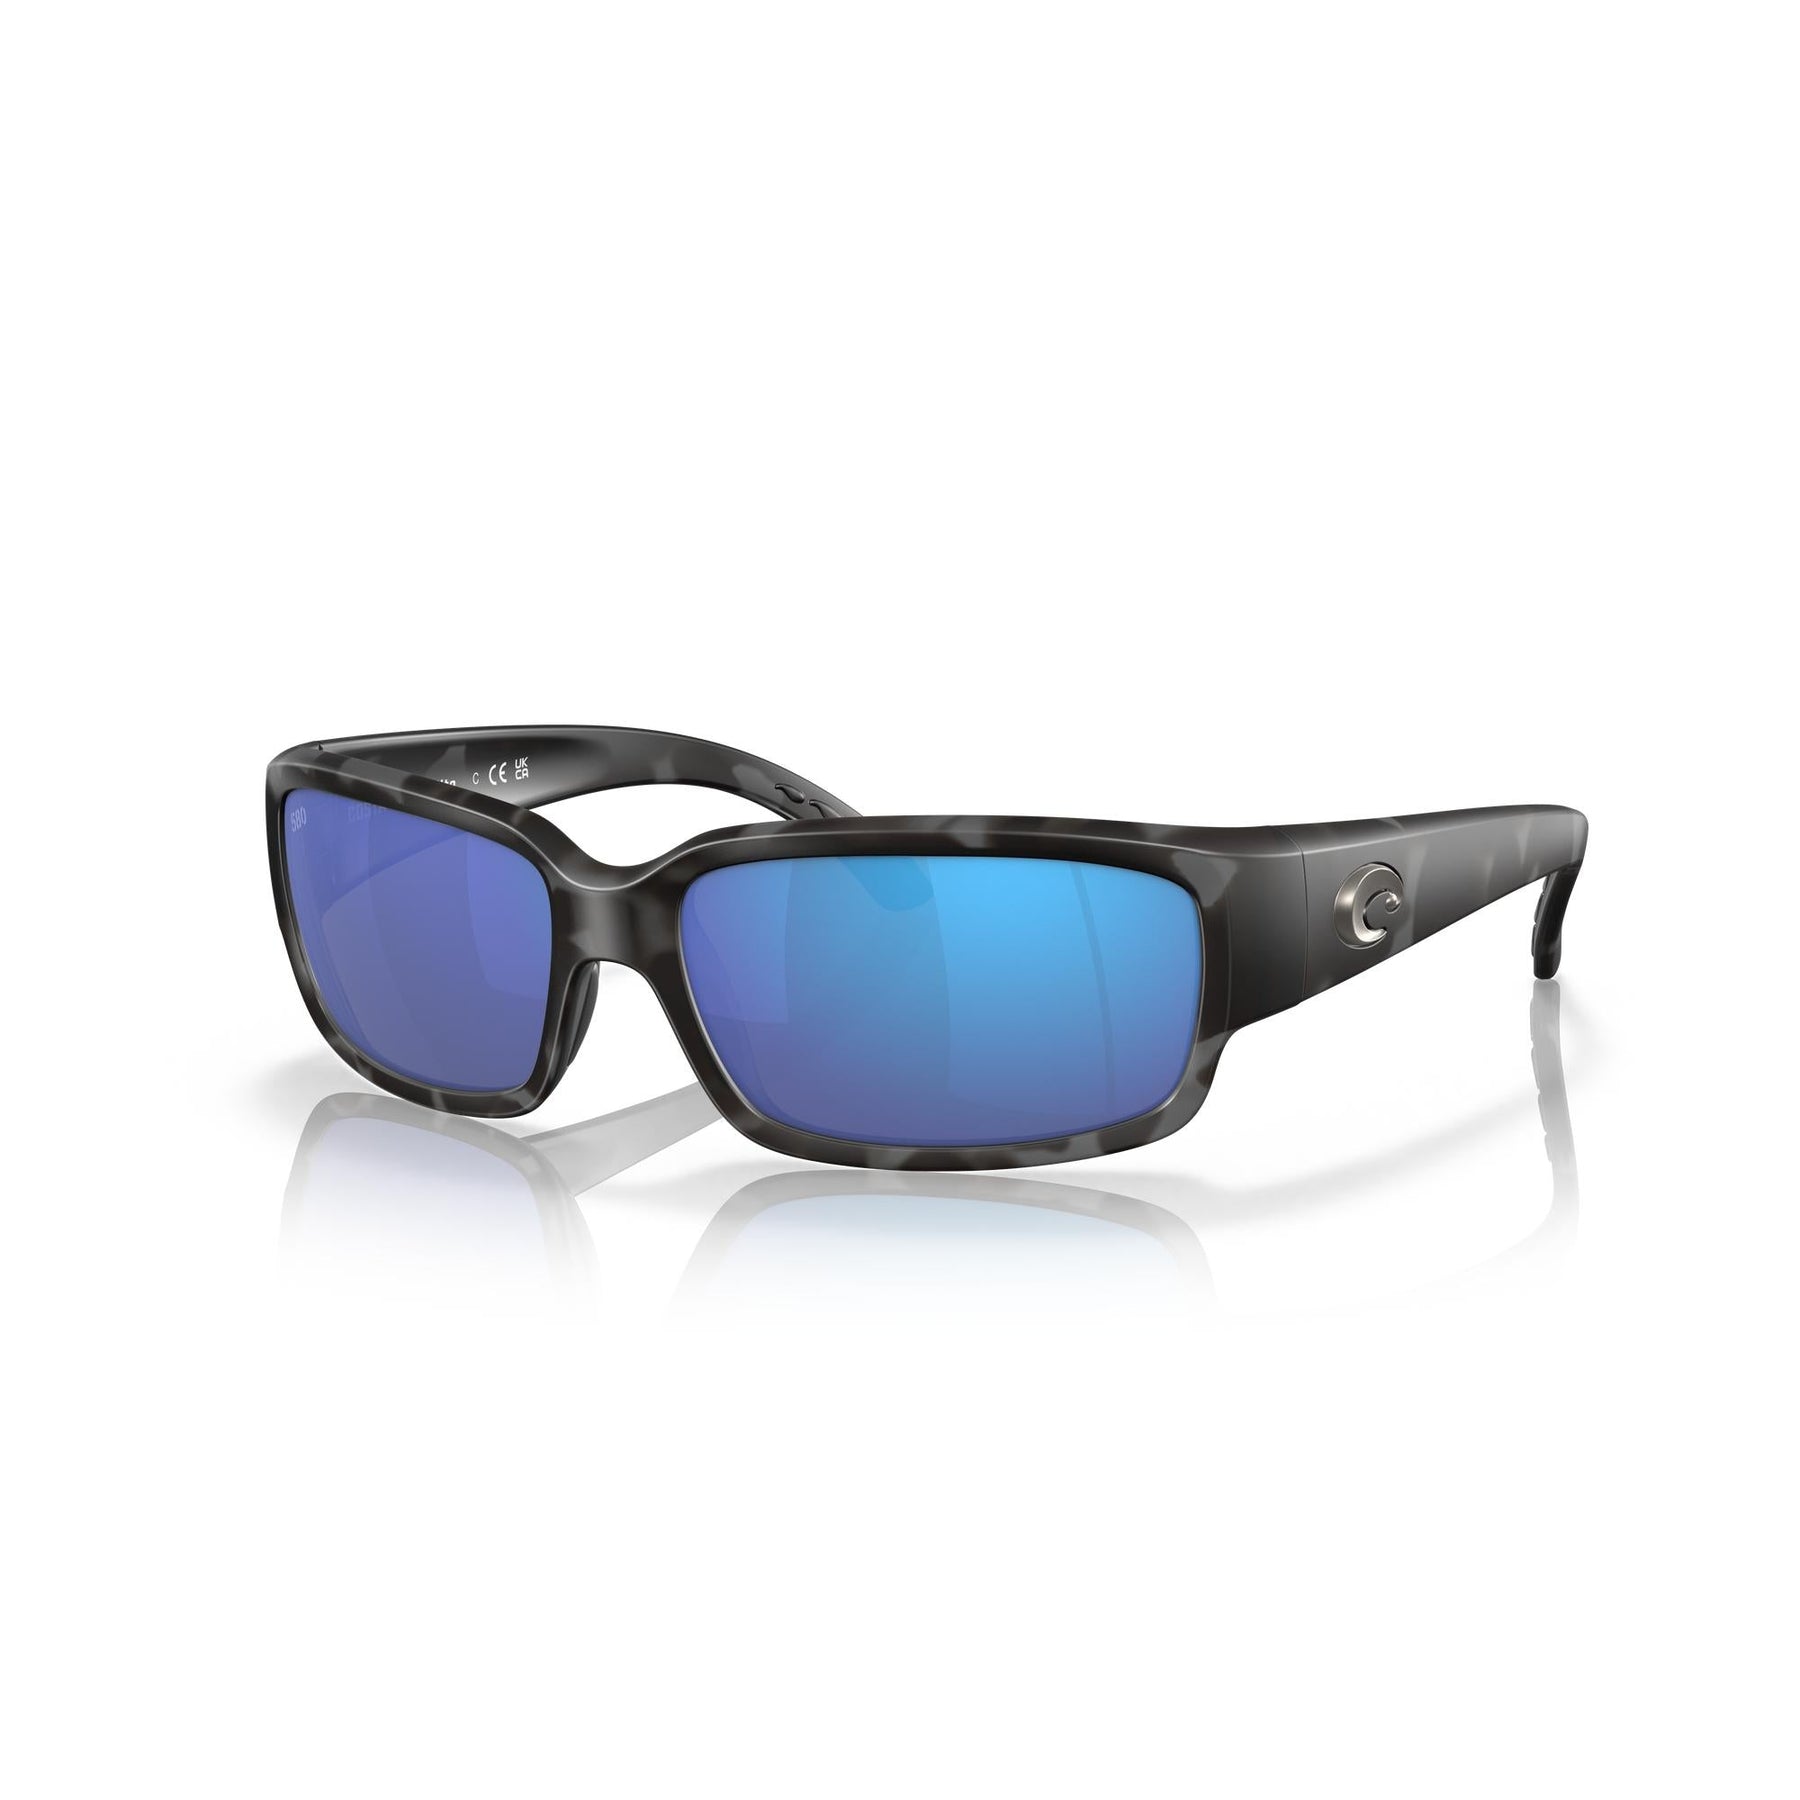 View of Sunglasses Costa Caballito Tiger Shark Blue Mirror 580G available at EZOKO Pike and Musky Shop